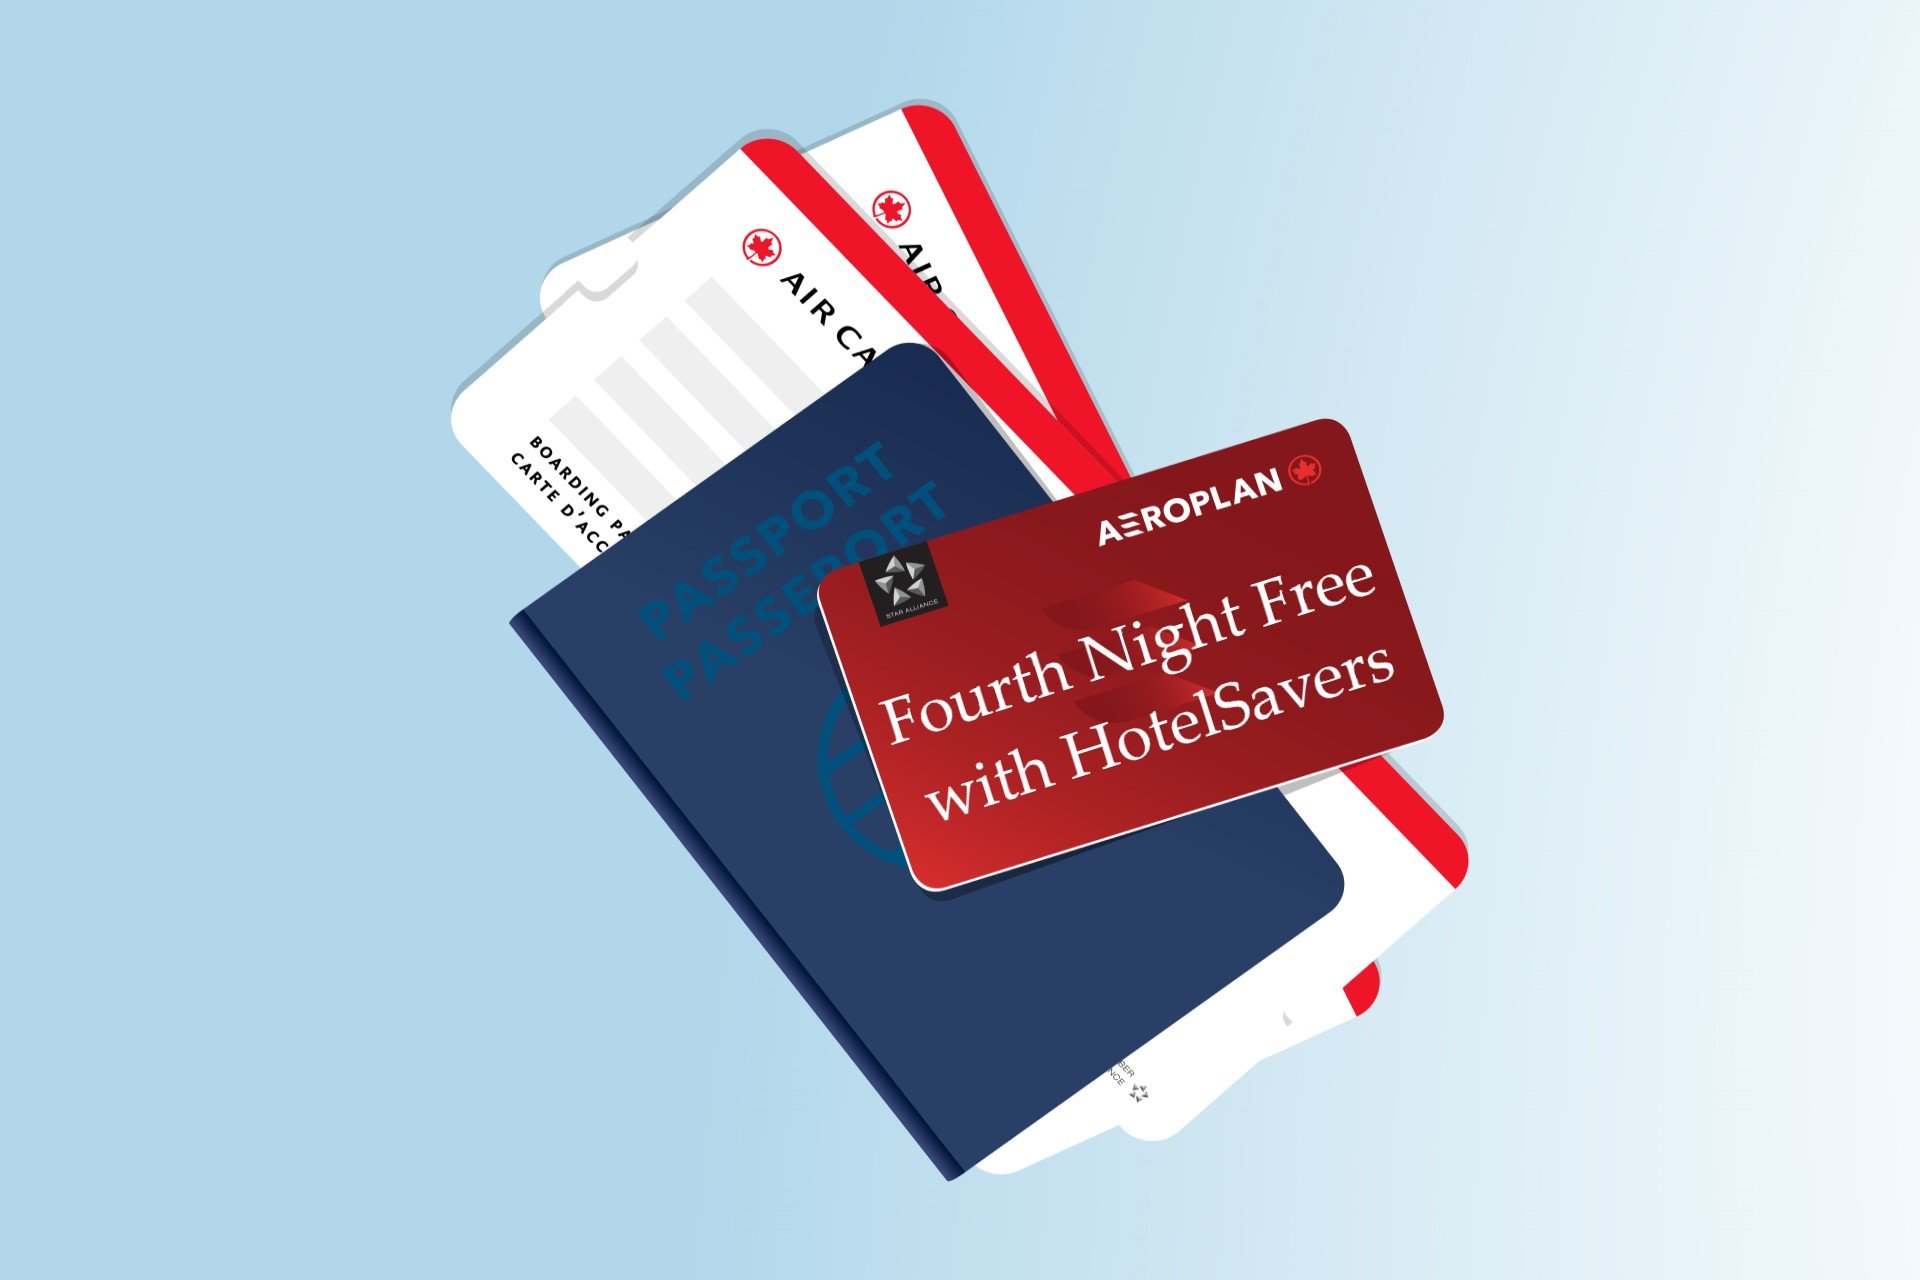 Aeroplan launches fourth night free promotion with hotelsavers for us and canadian credit card memebrs bestcards.com